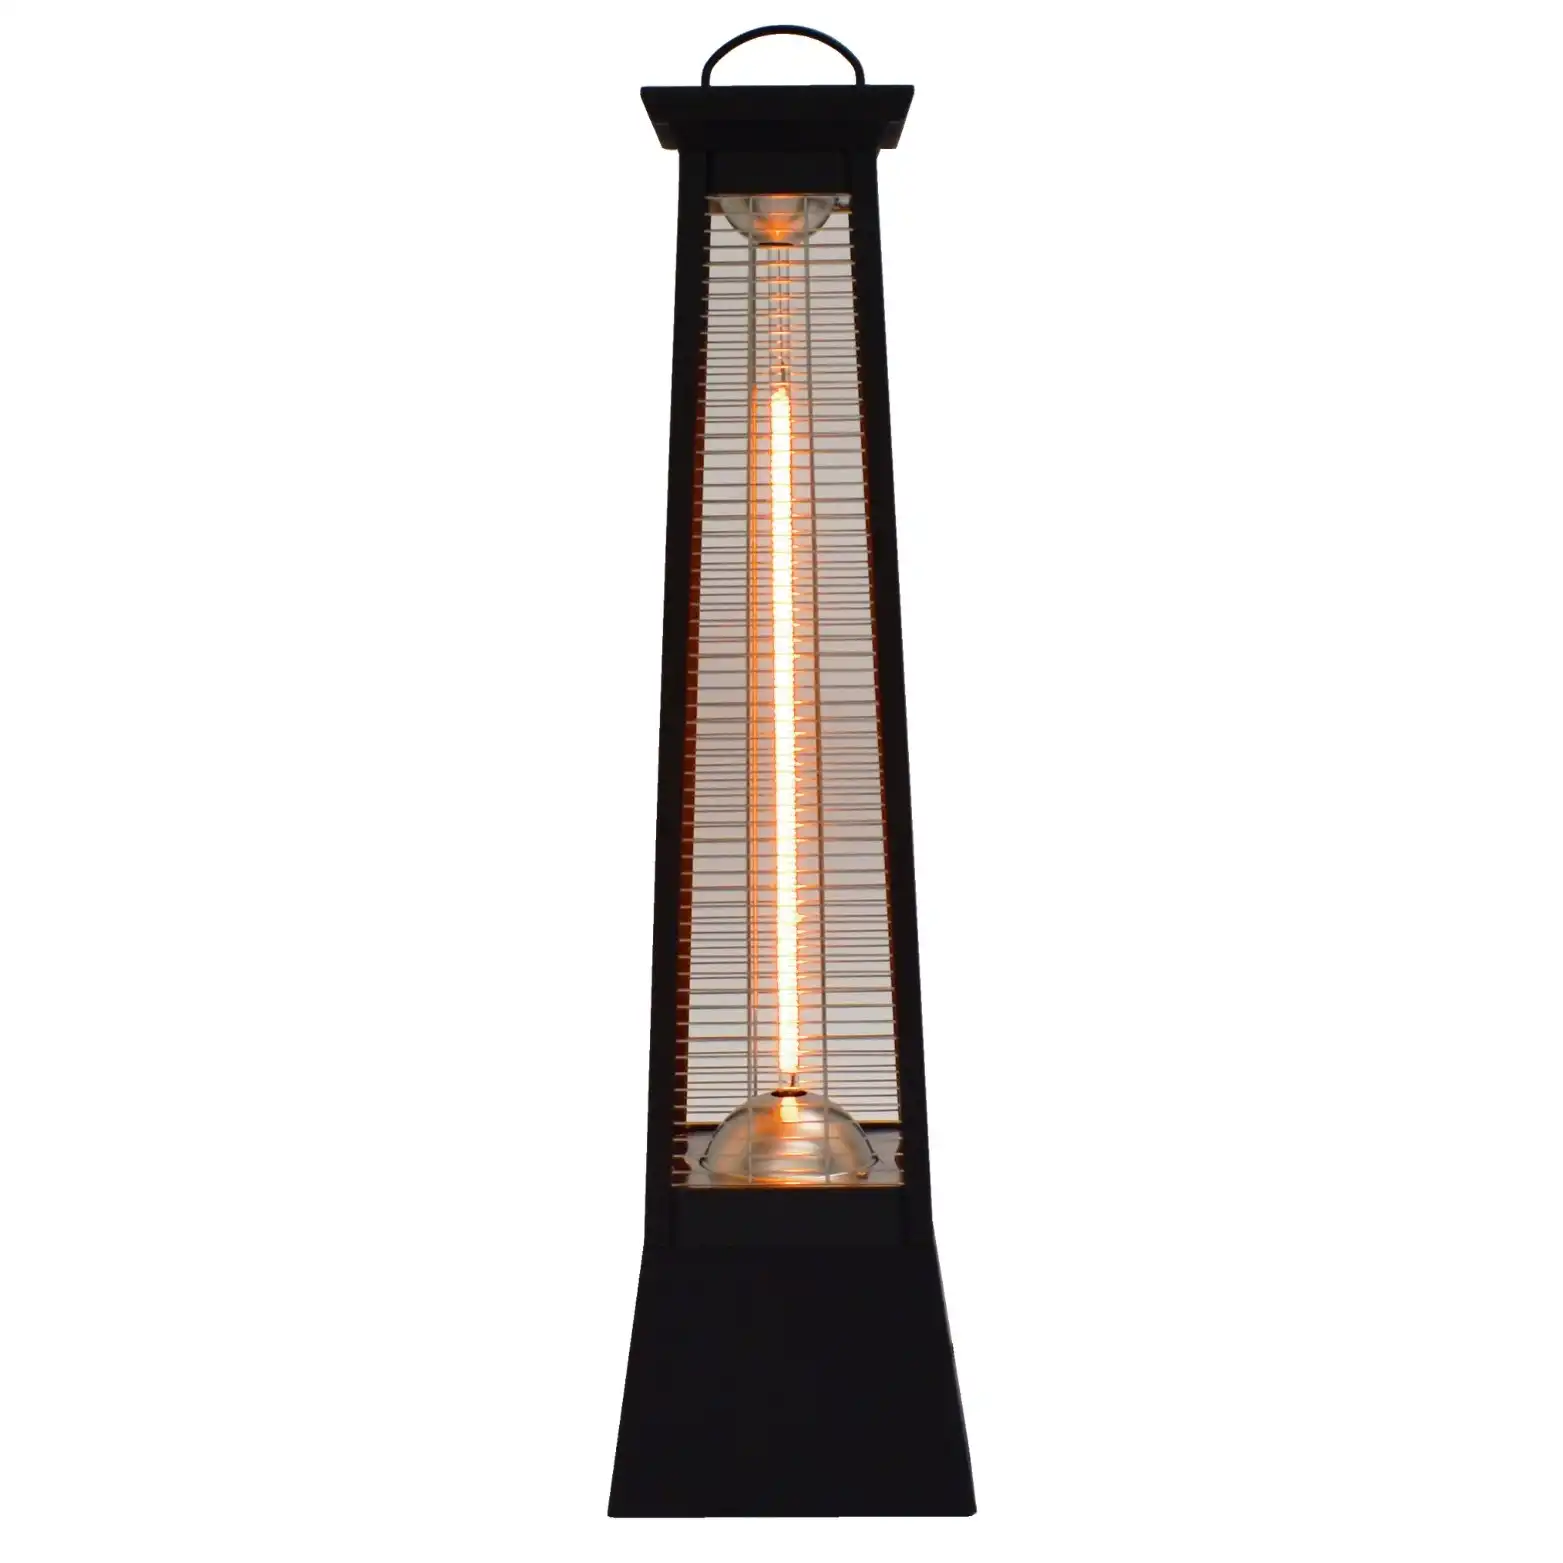 Hotto Volcano Tower Infrared Heater